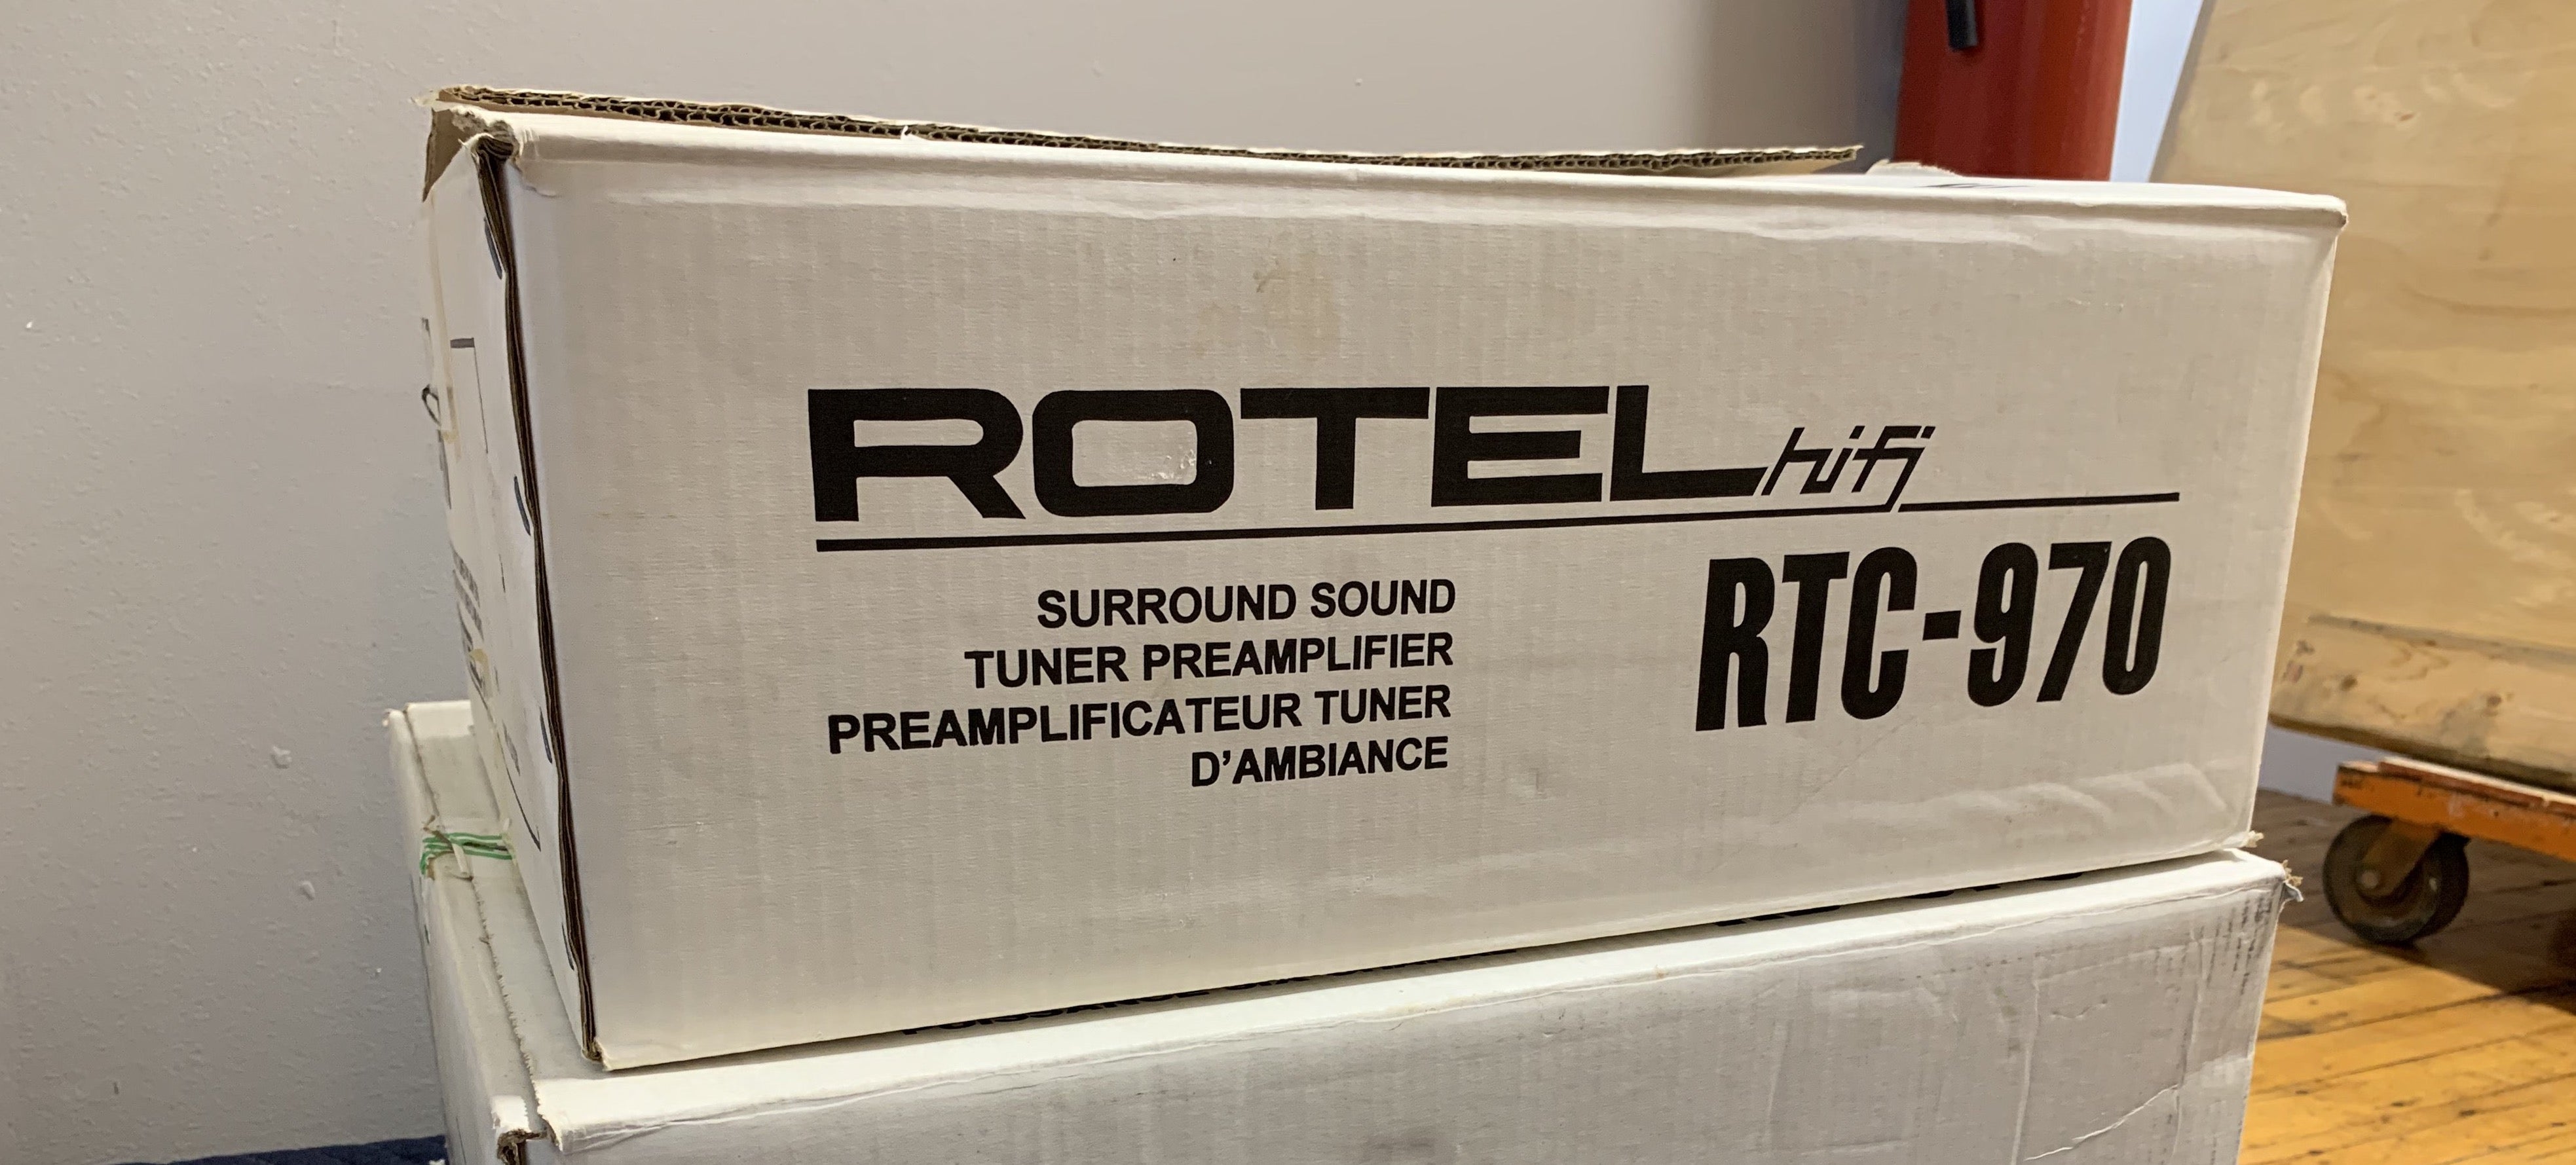 Rotel RTC-970 ProLogic Surround Preamp - SOLD